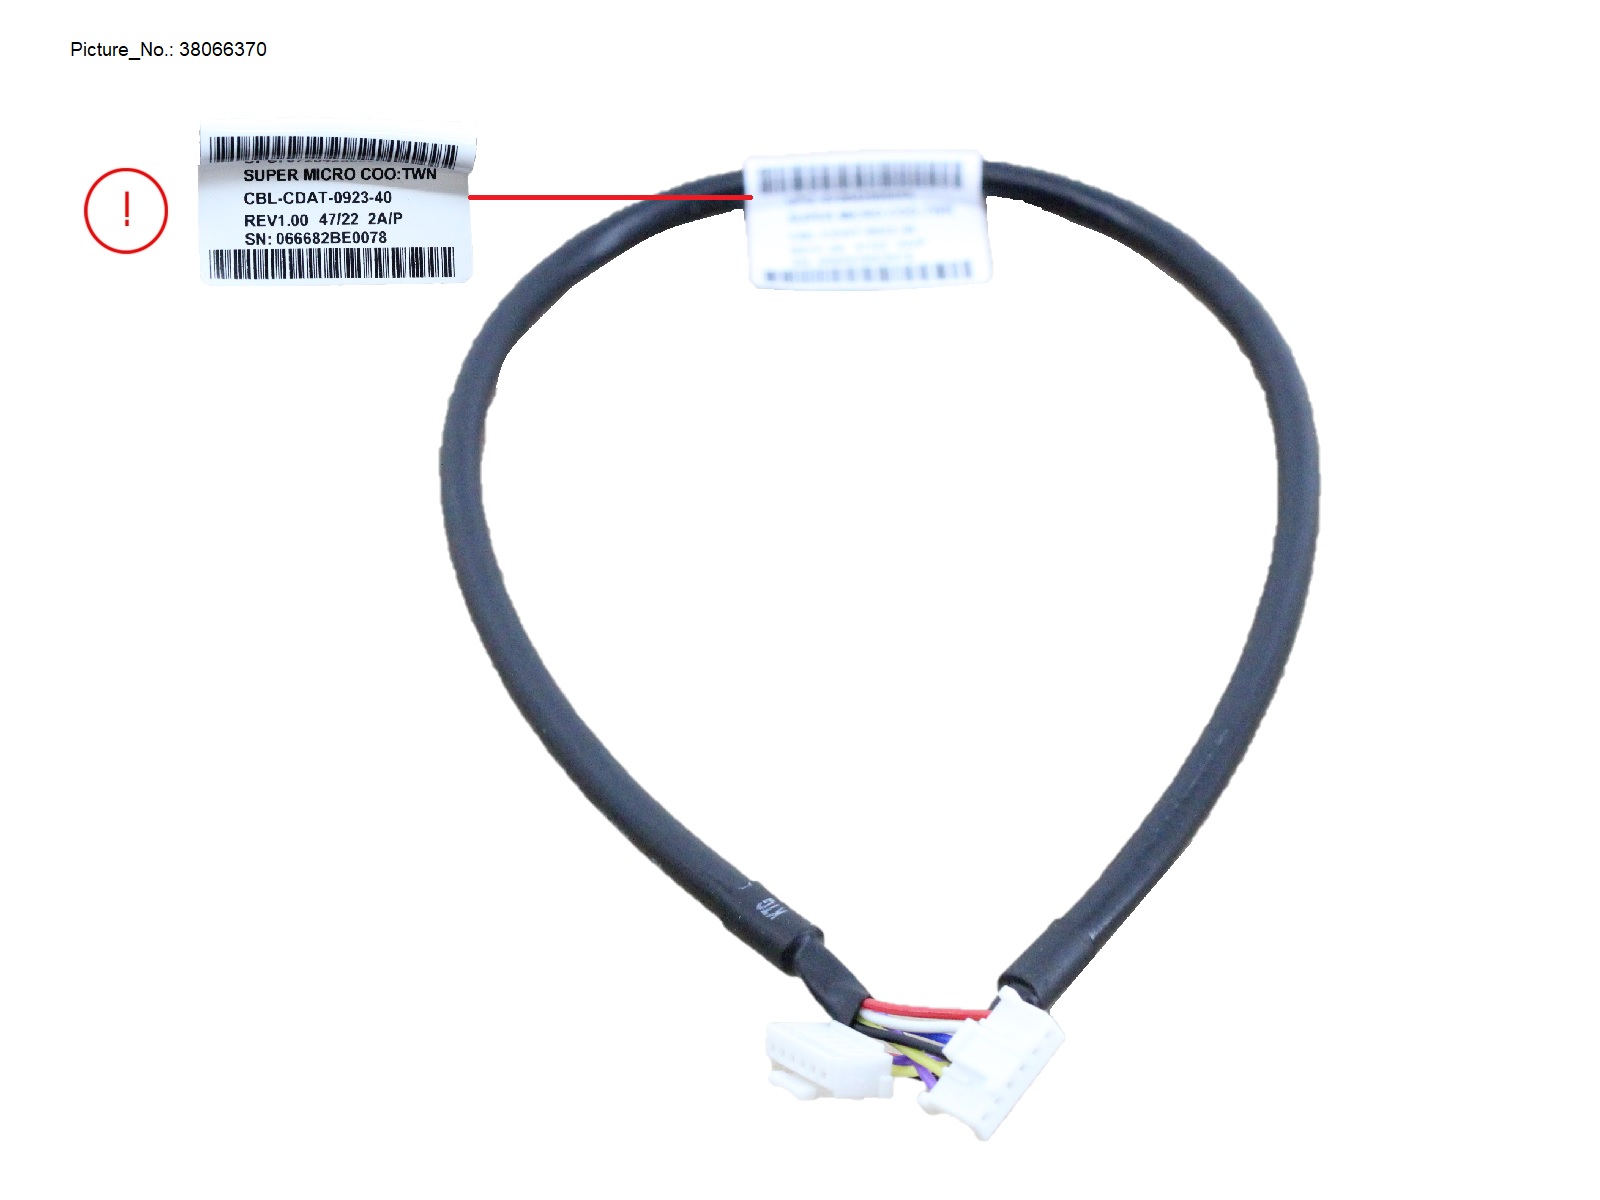 PMBUS AND CPLD PWR CABLE 400MM (MB TO FA